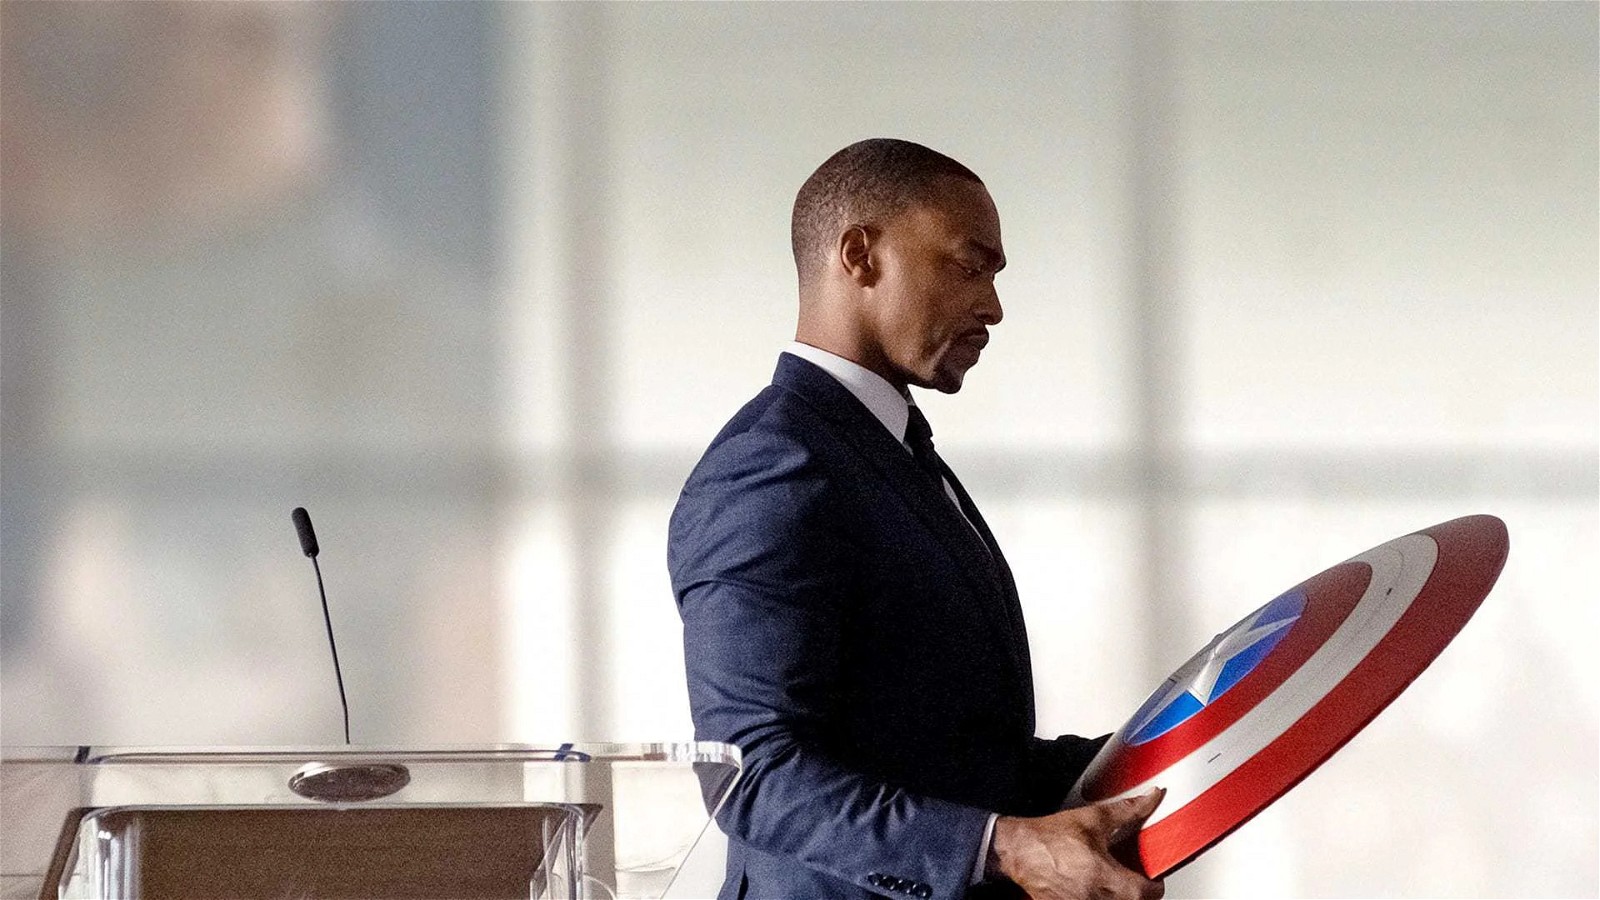 Anthony Mackie in The Falcon and the Winter Soldier [Credit: Disney+]